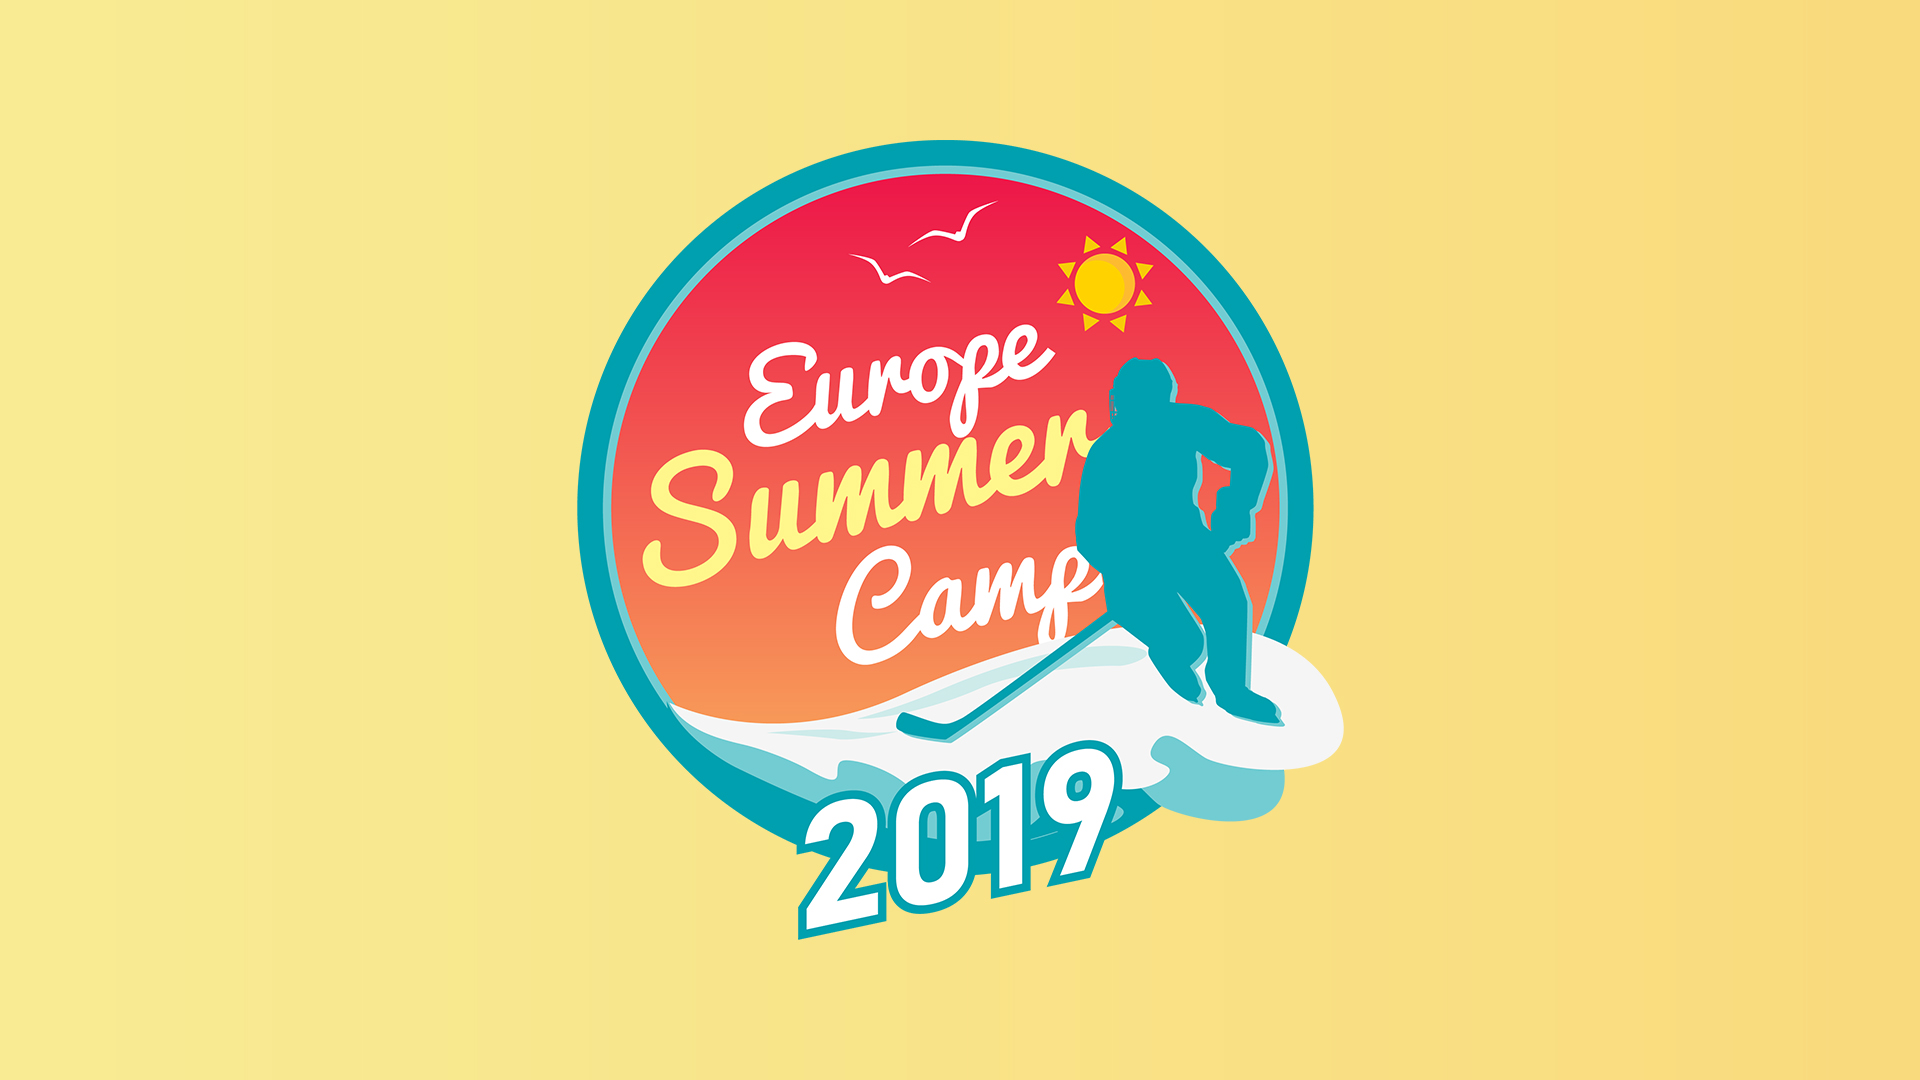 Registration for Europe Summer Camp 2019 is live now!